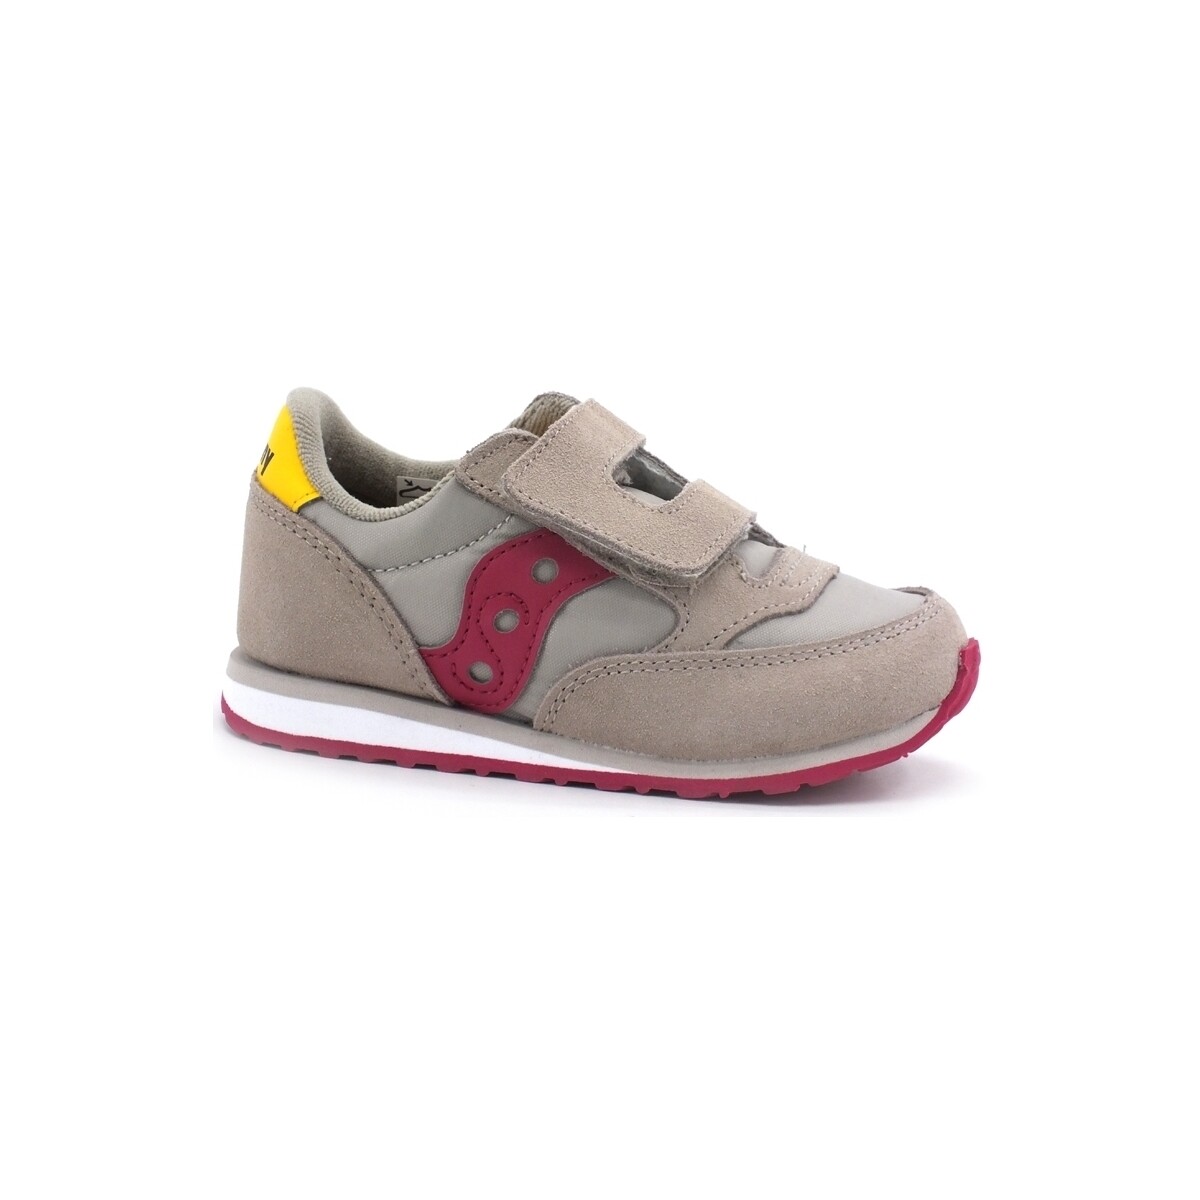 Chaussures Multisport Saucony Baby Jazz HL Sneaker Taupe Burgundy SL164811 Gris